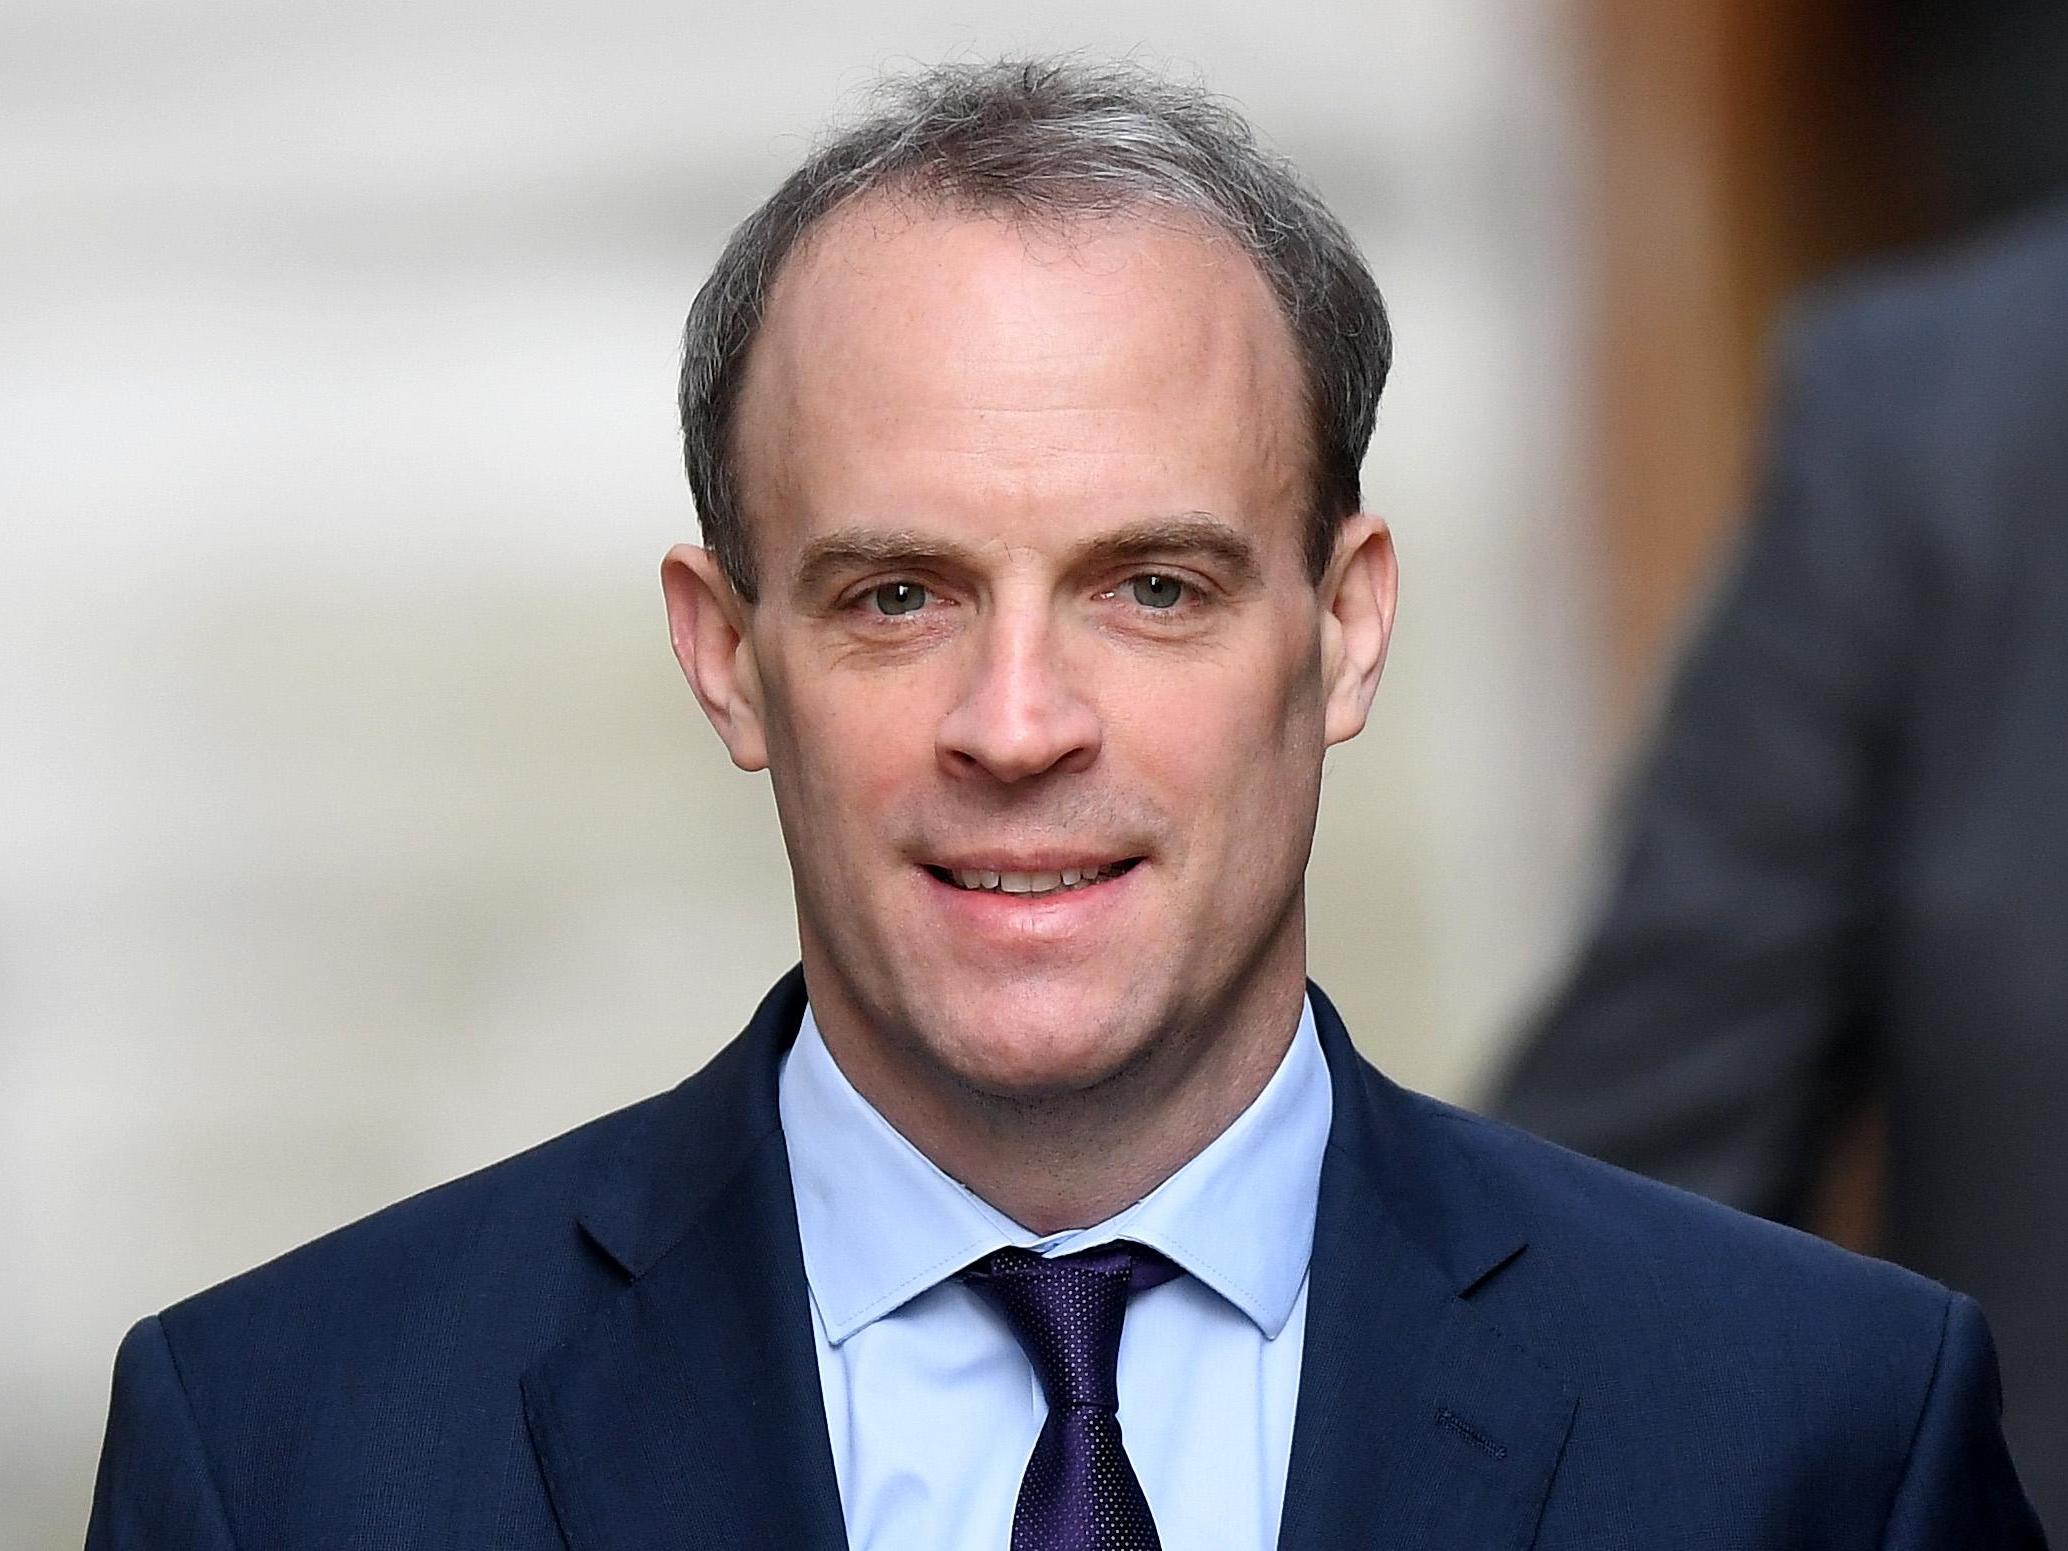 Dominic Raab was ridiculed for his BLM comments